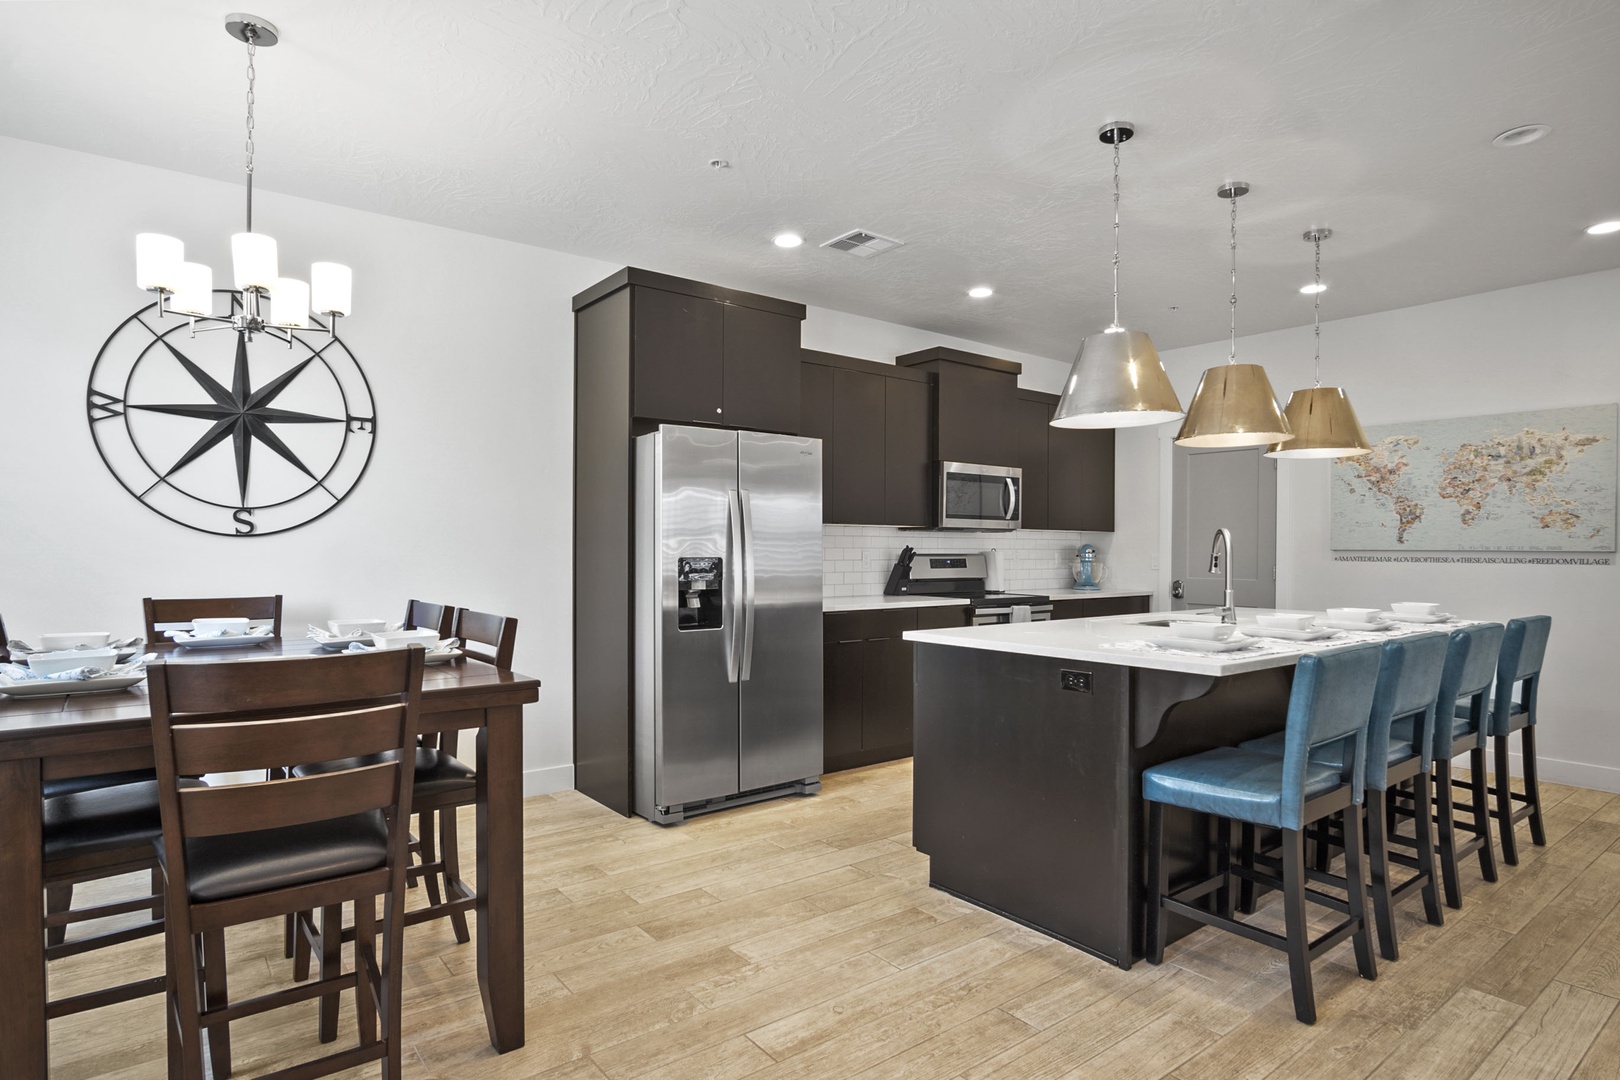 The spacious, modern kitchen offers fantastic amenities and ample seating options